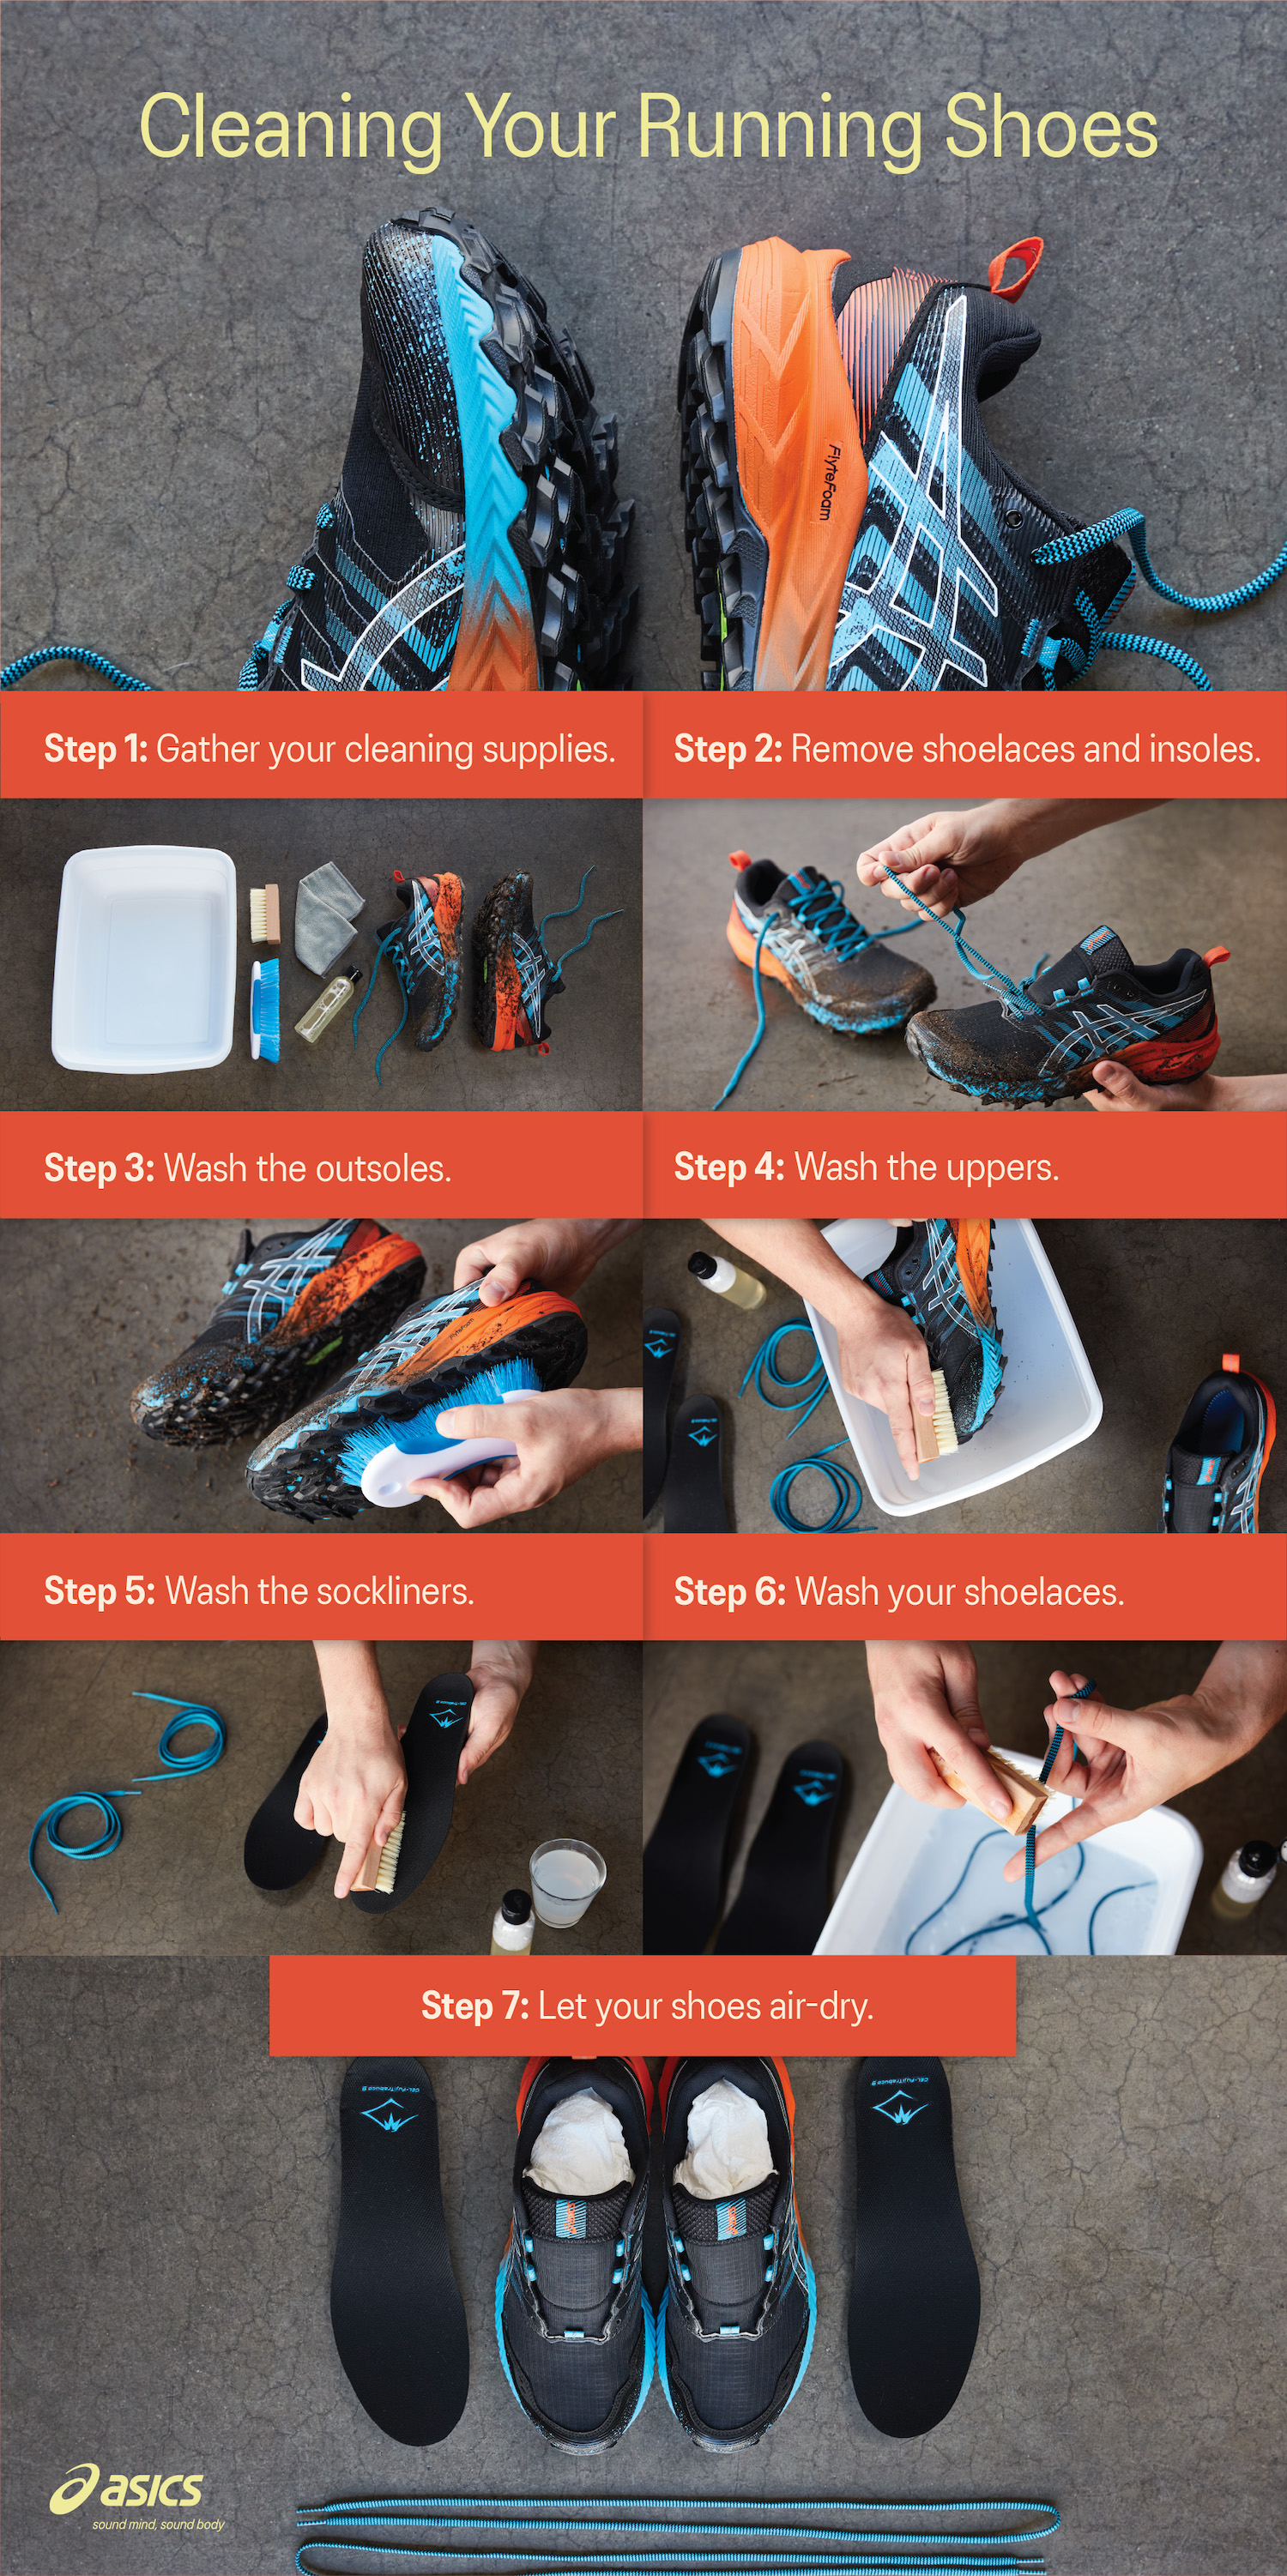 How to Clean Your Running Shoes | ASICS